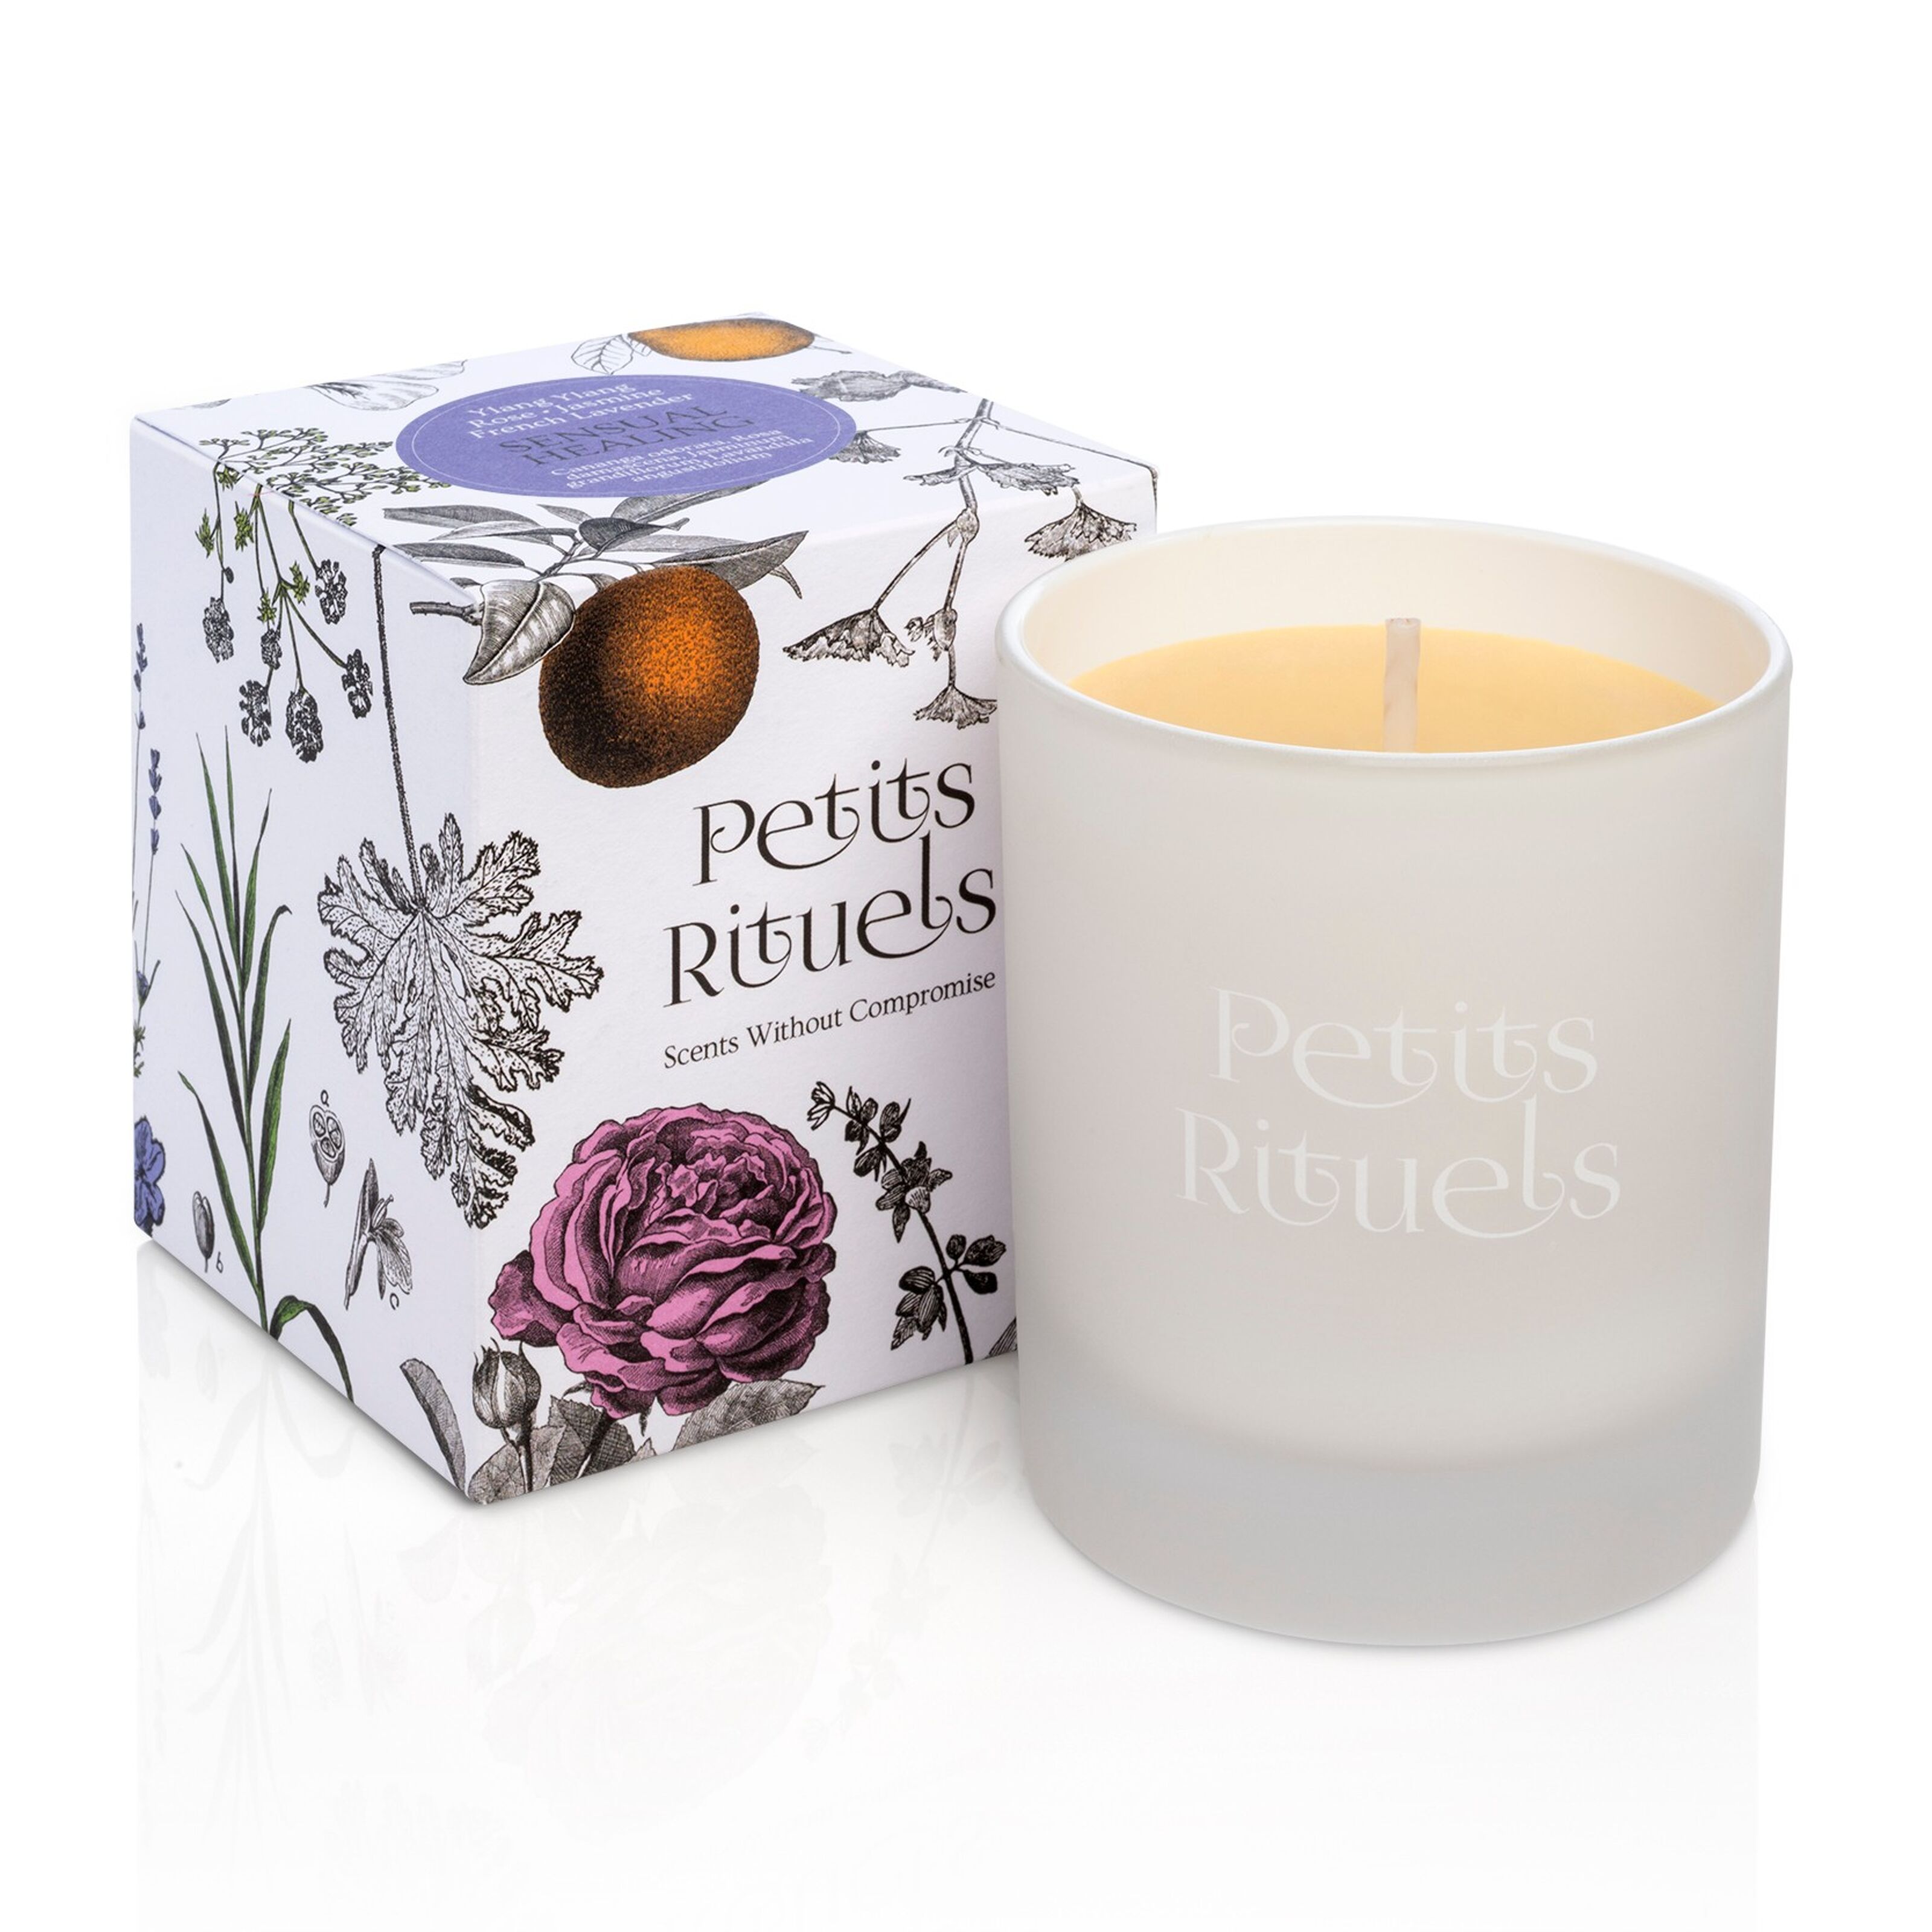 The Scientific Benefits Of Aromatherapy Candles - Petits Rituels